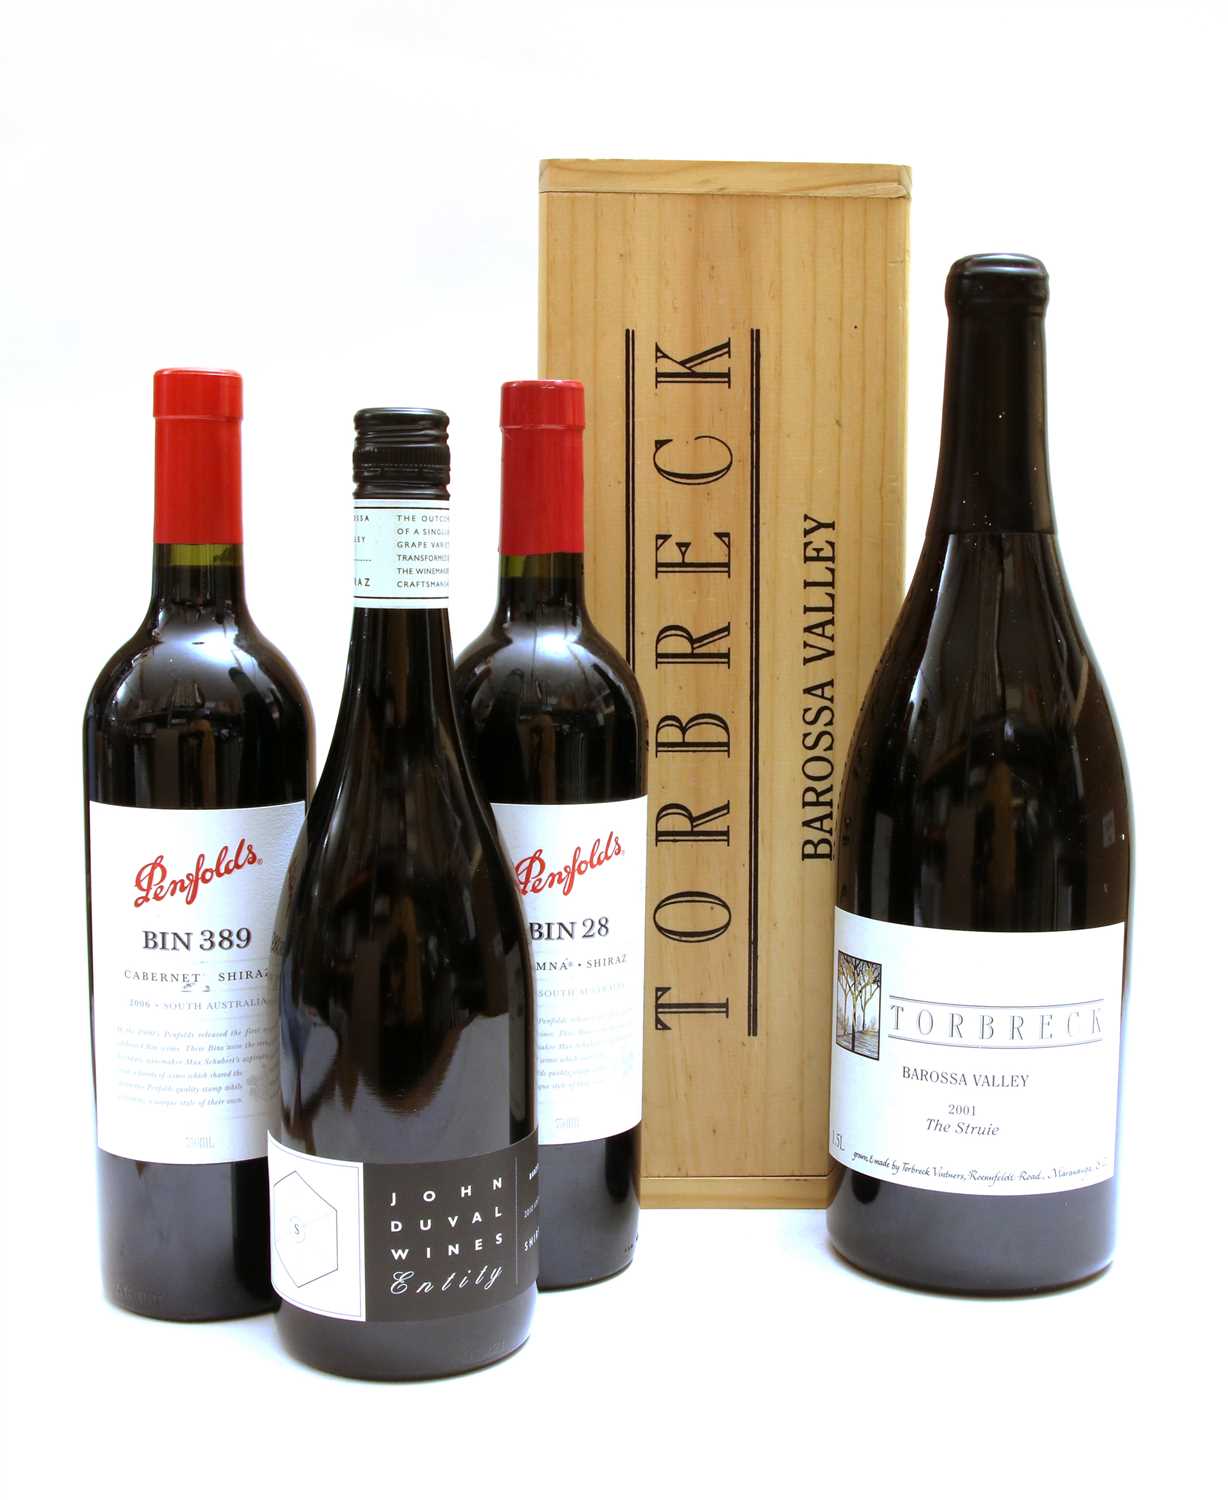 Lot 177 - Assorted Australian red wines: Penfolds, Torbrek and John Duval Wines, 3 bottles and 1 magnum